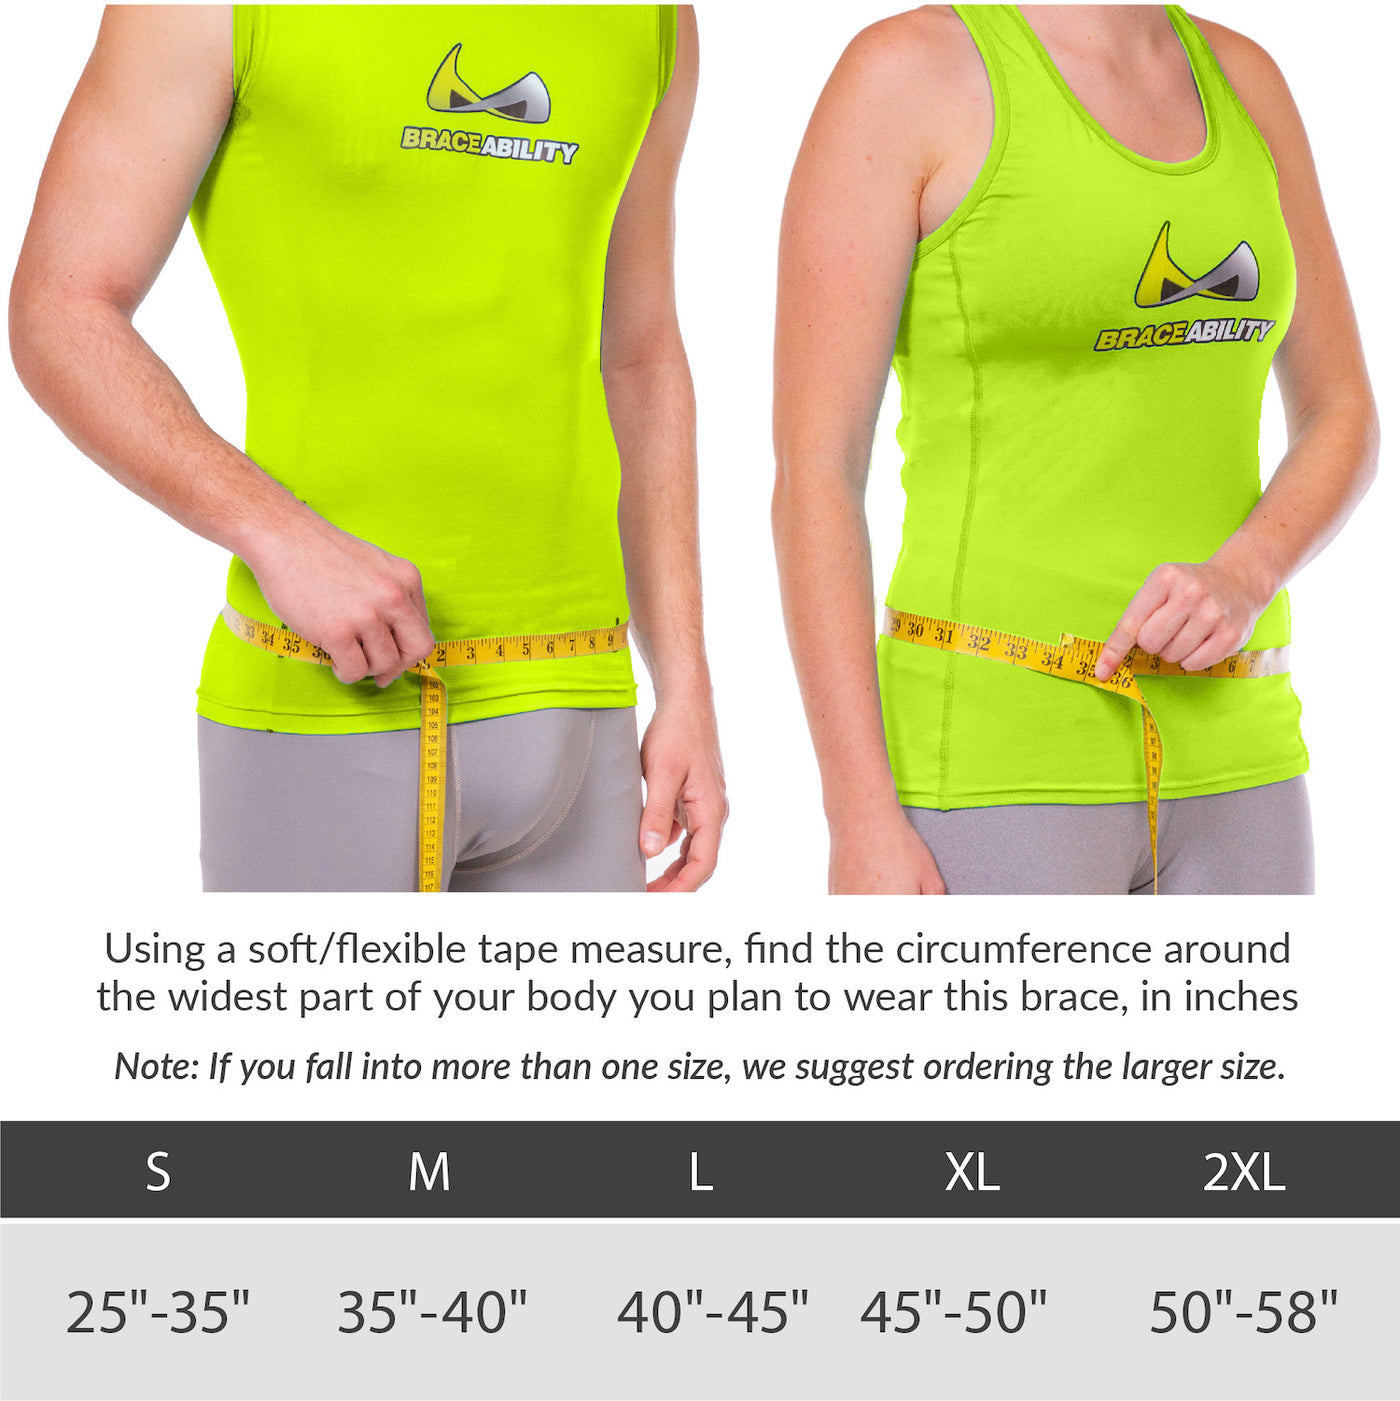 Sizing chart for lordosis back brace. Available in size S/M and L/XL